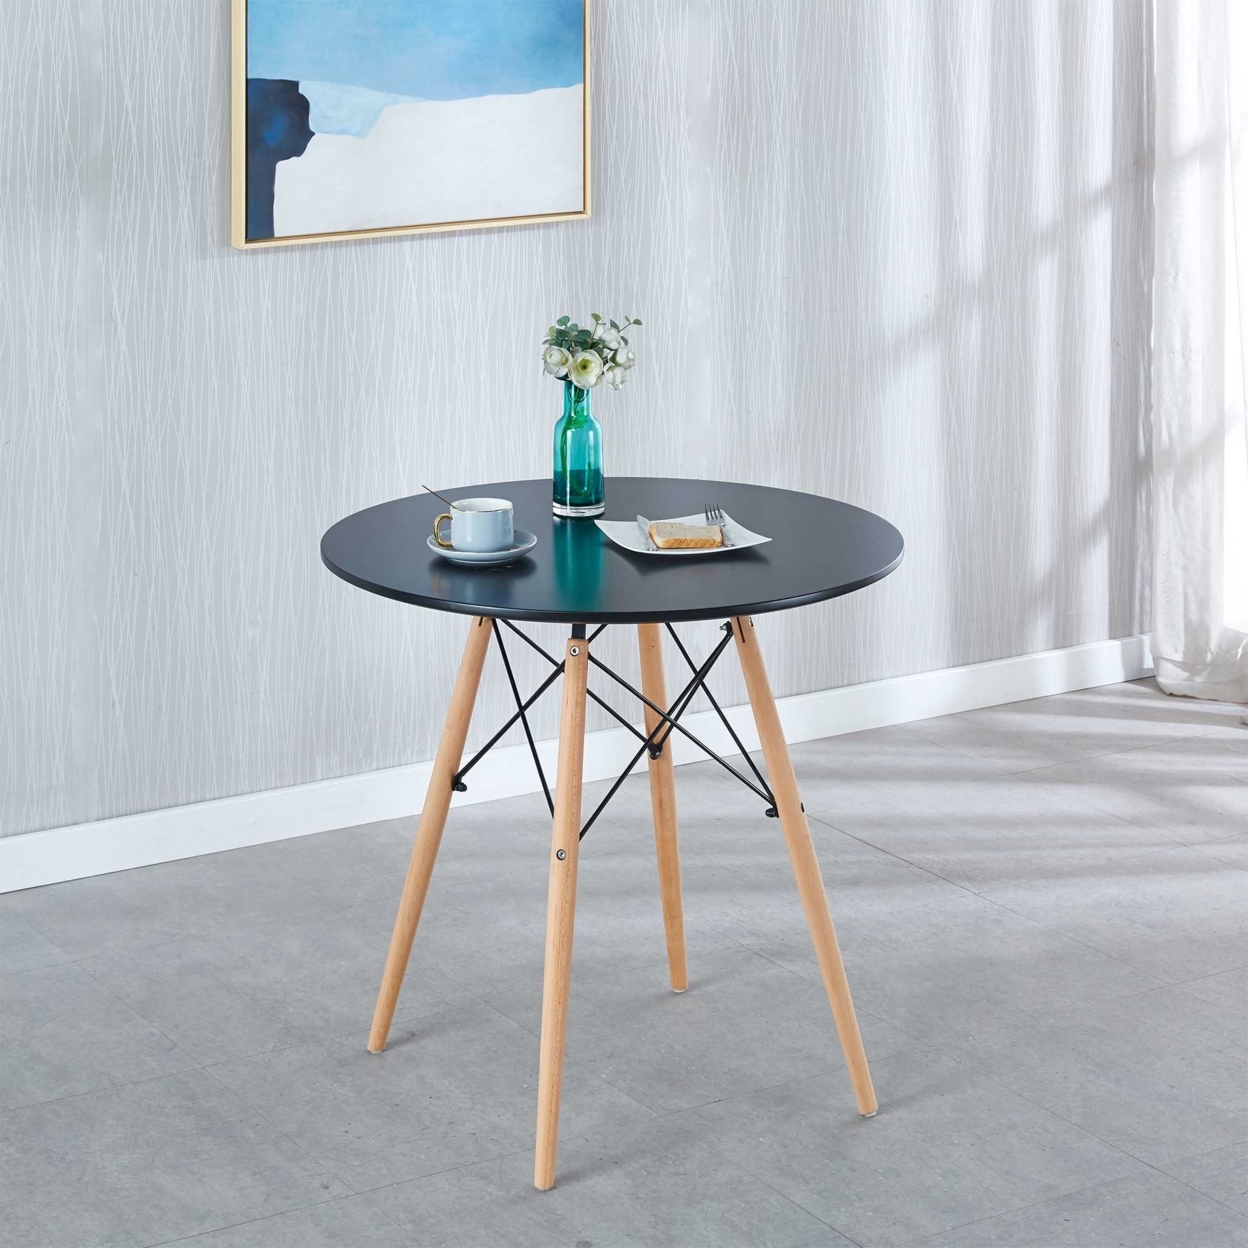 31.5"Black Table Mid-century Dining Table for 2-4 people With Round Mdf Table Top, Pedestal Dining Table, End Table Leisure Coffee Table